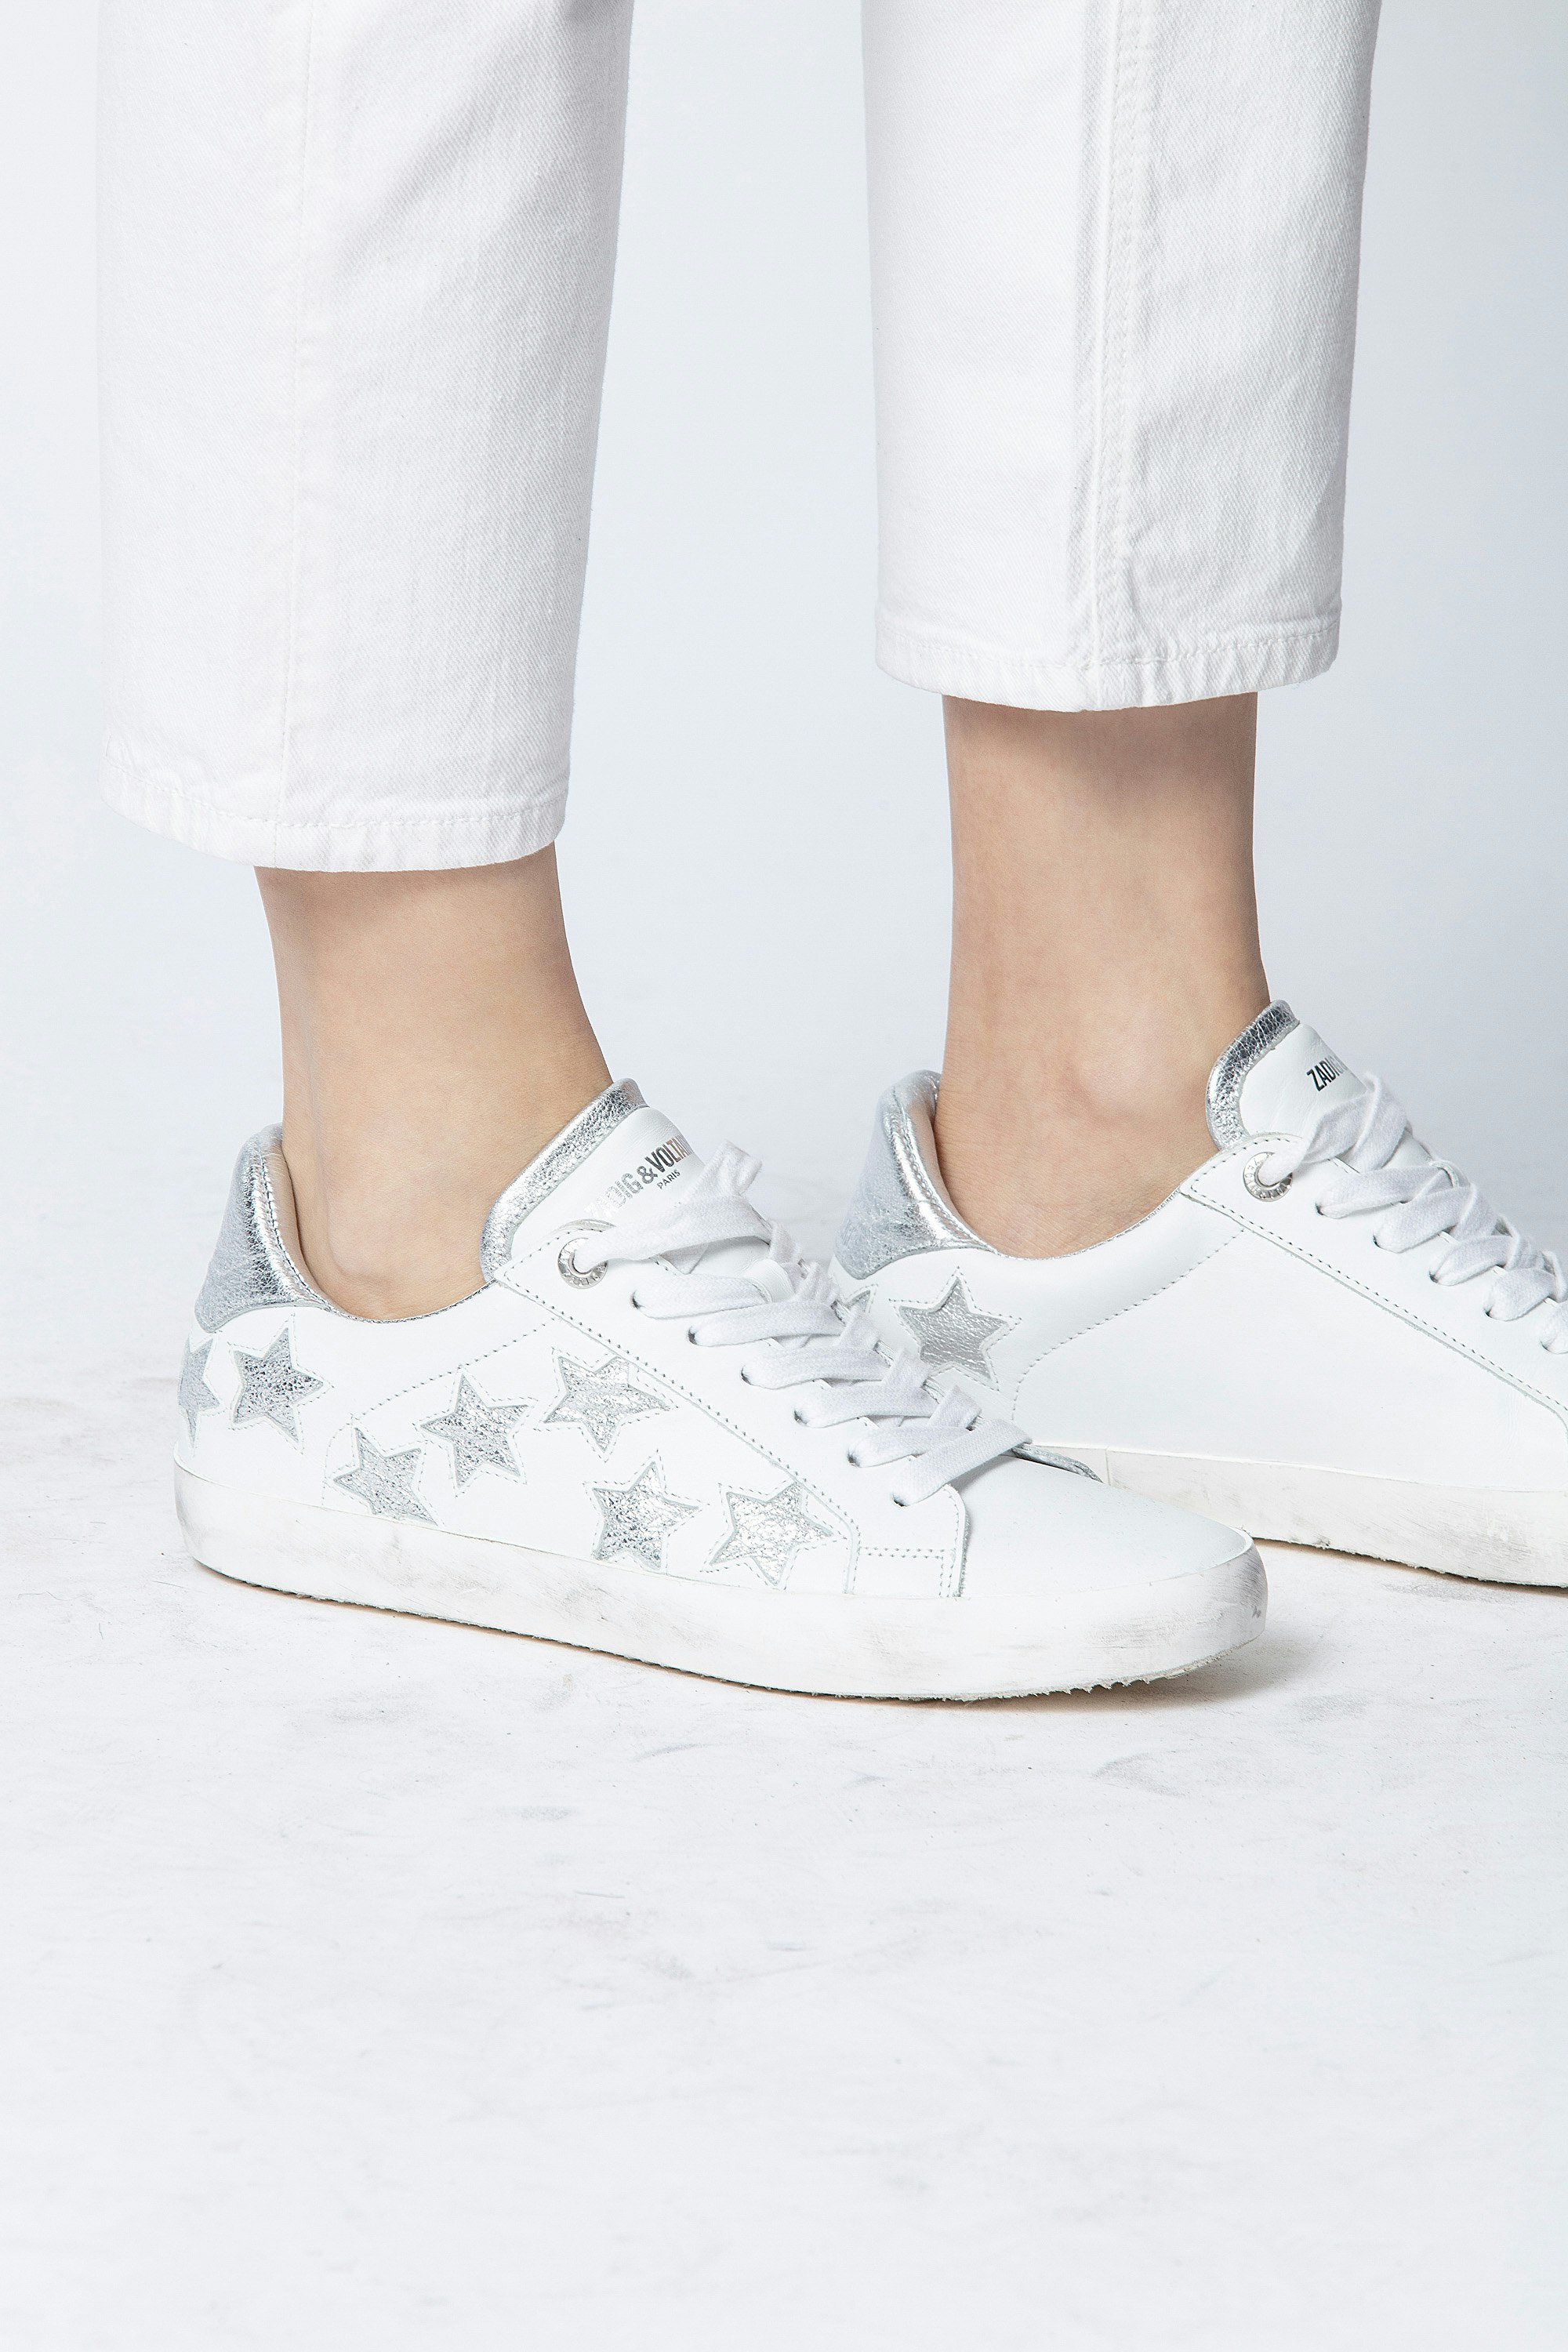 white sneakers with stars on them